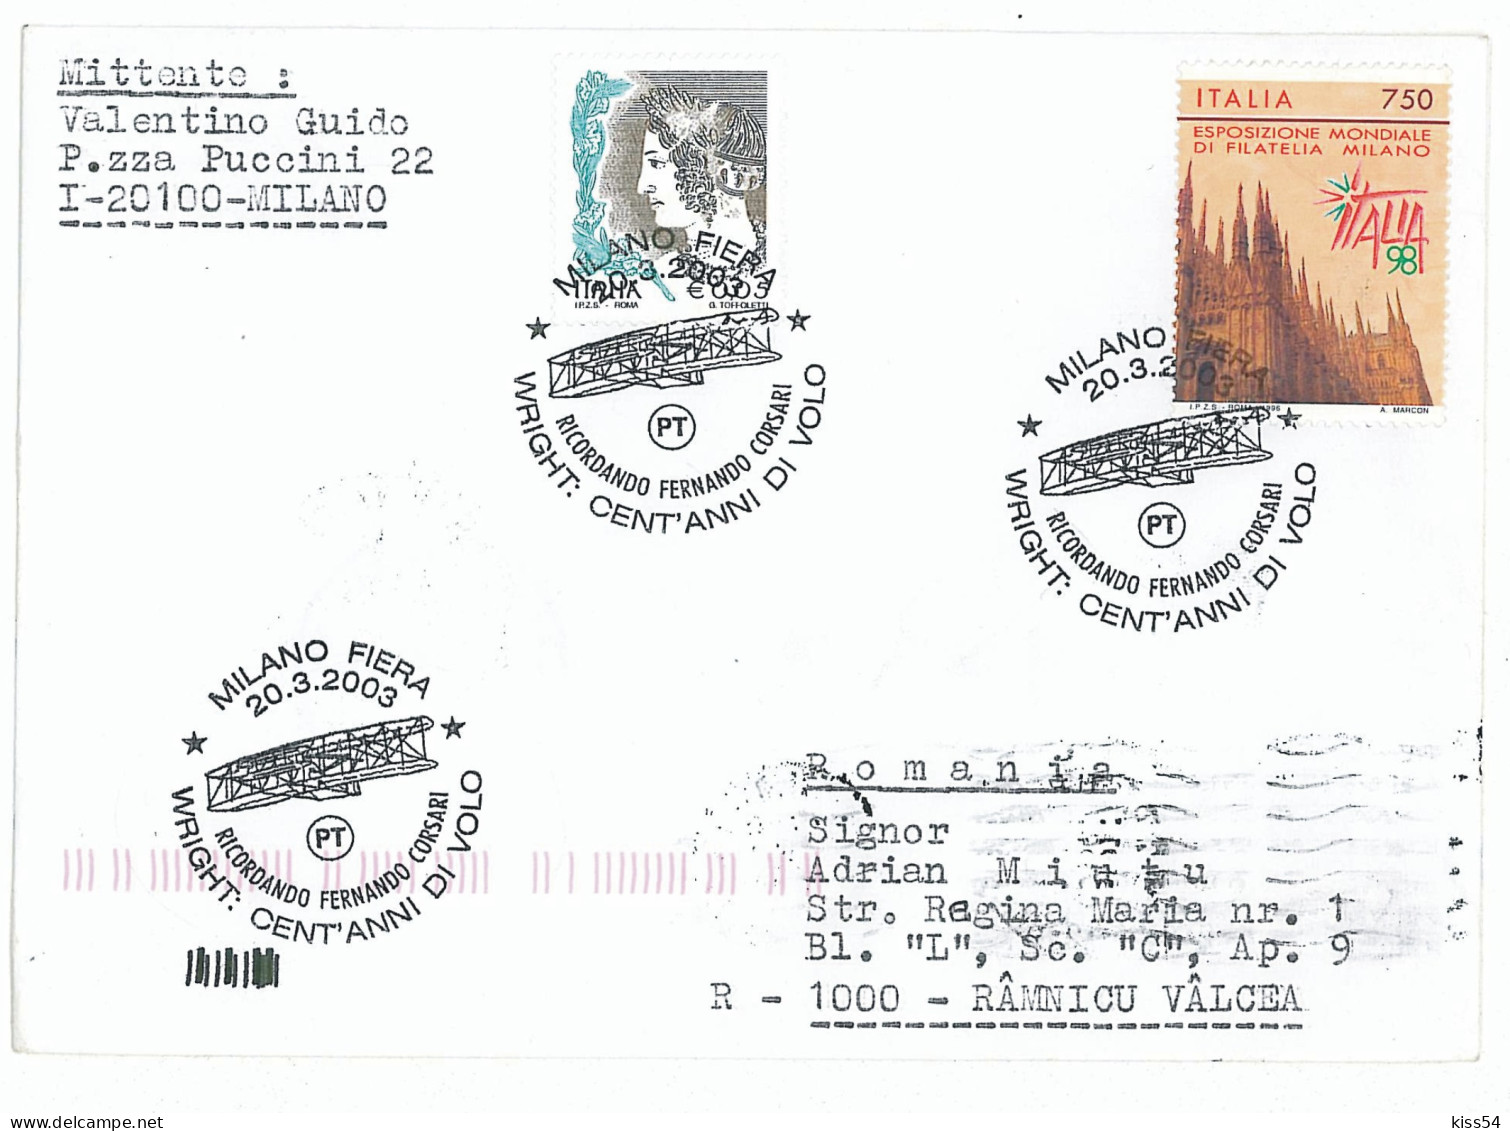 COV 34 - 1038-a AIRPLANE, Flight, Italy - Cover - Used - 2003 - Covers & Documents